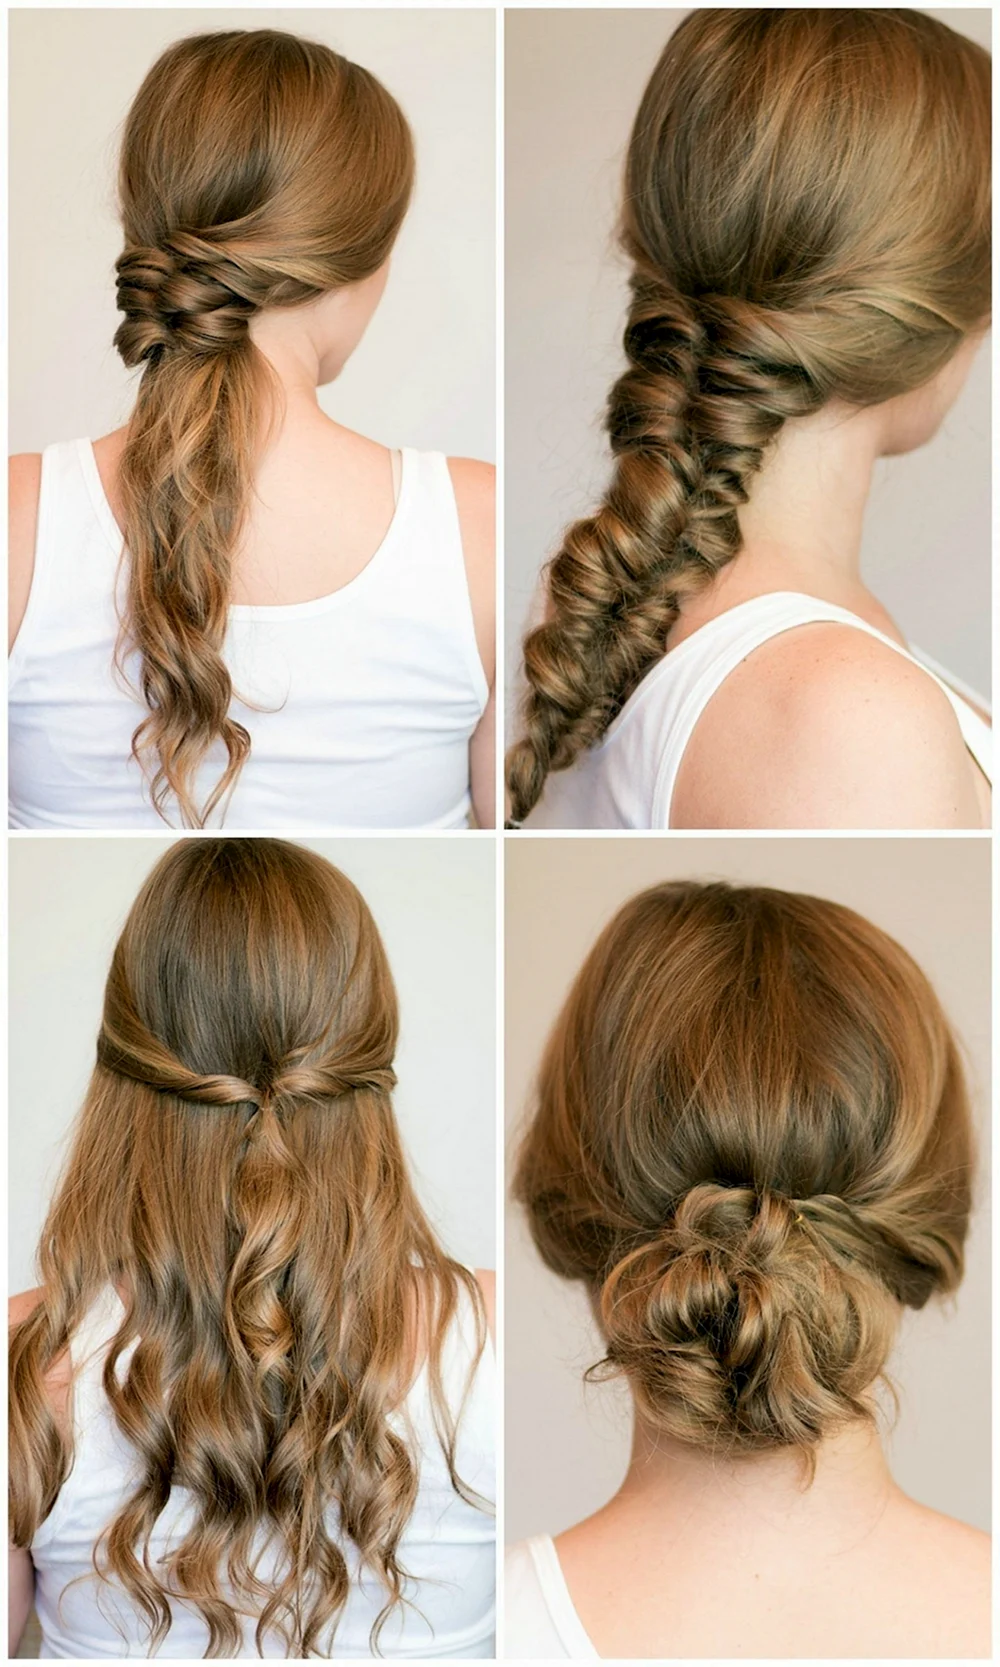 Hairstyles for Braids